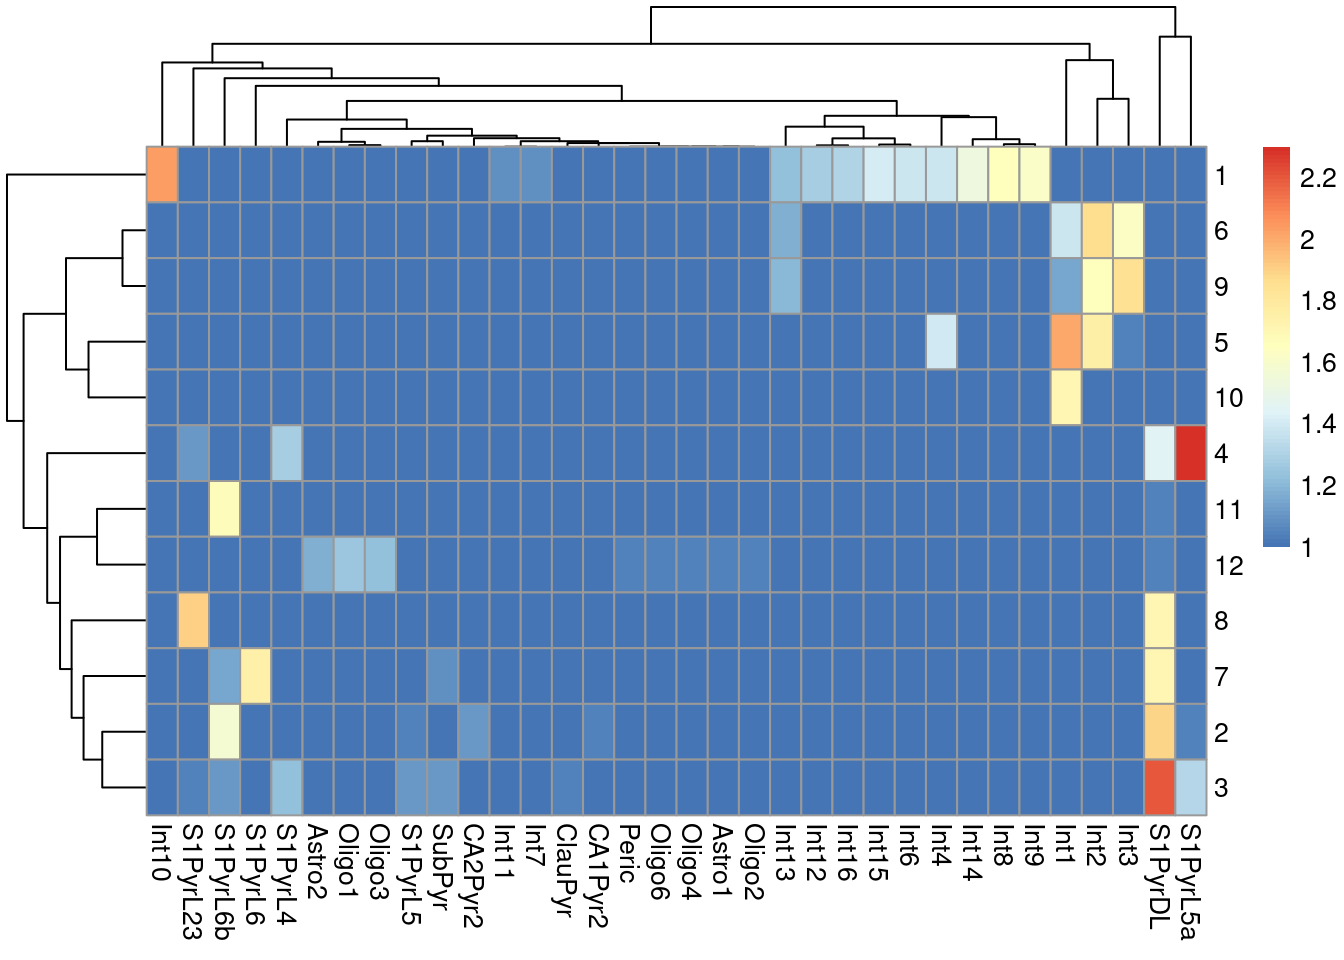 Heatmap of the log-transformed number of cells in each combination of label (column) and cluster (row) in the Tasic dataset.